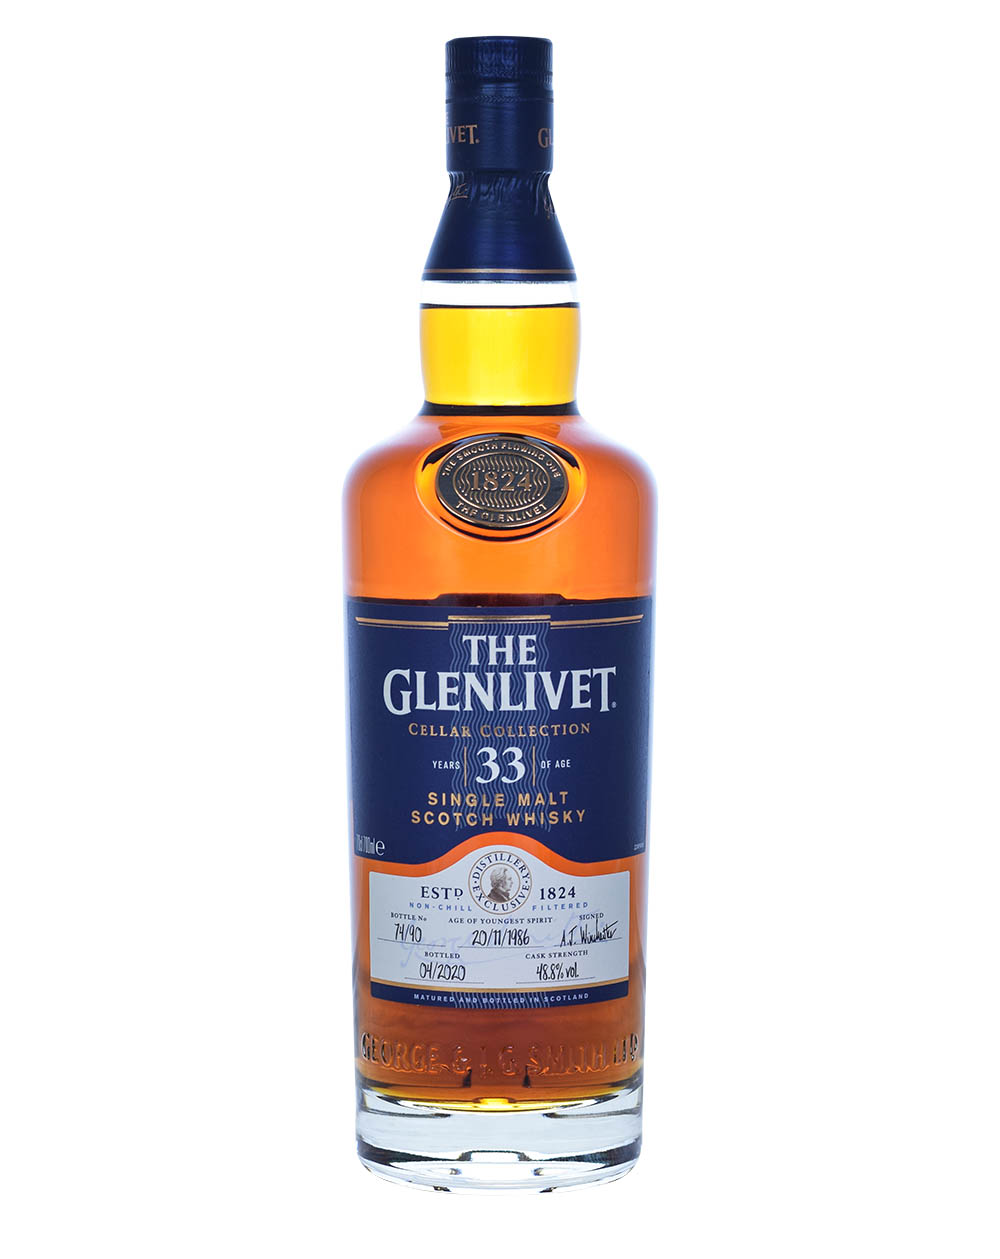 Glenlivet 33 Years Old Cellar Collection 1986 Musthave Malts MHM